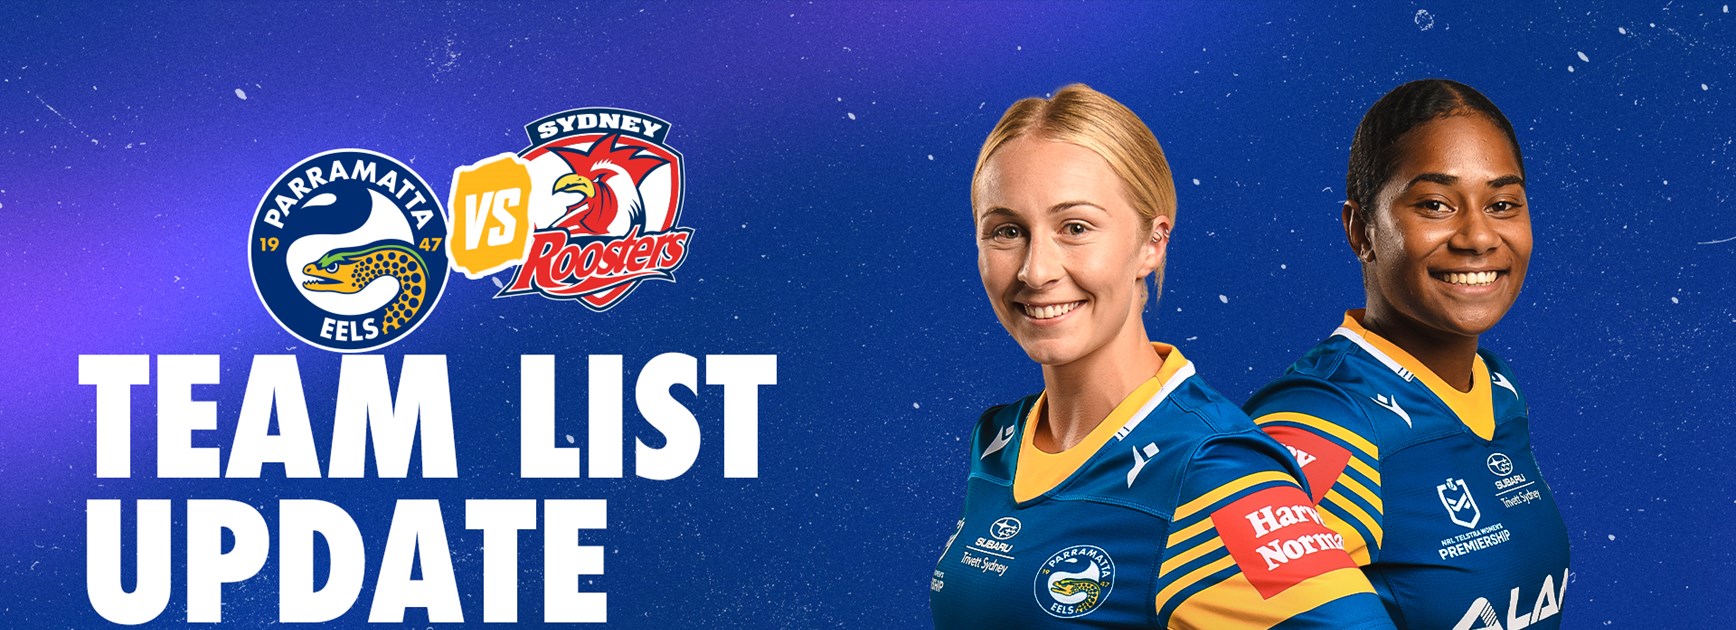 NRLW Team List Update - Eels v Roosters, Round Four